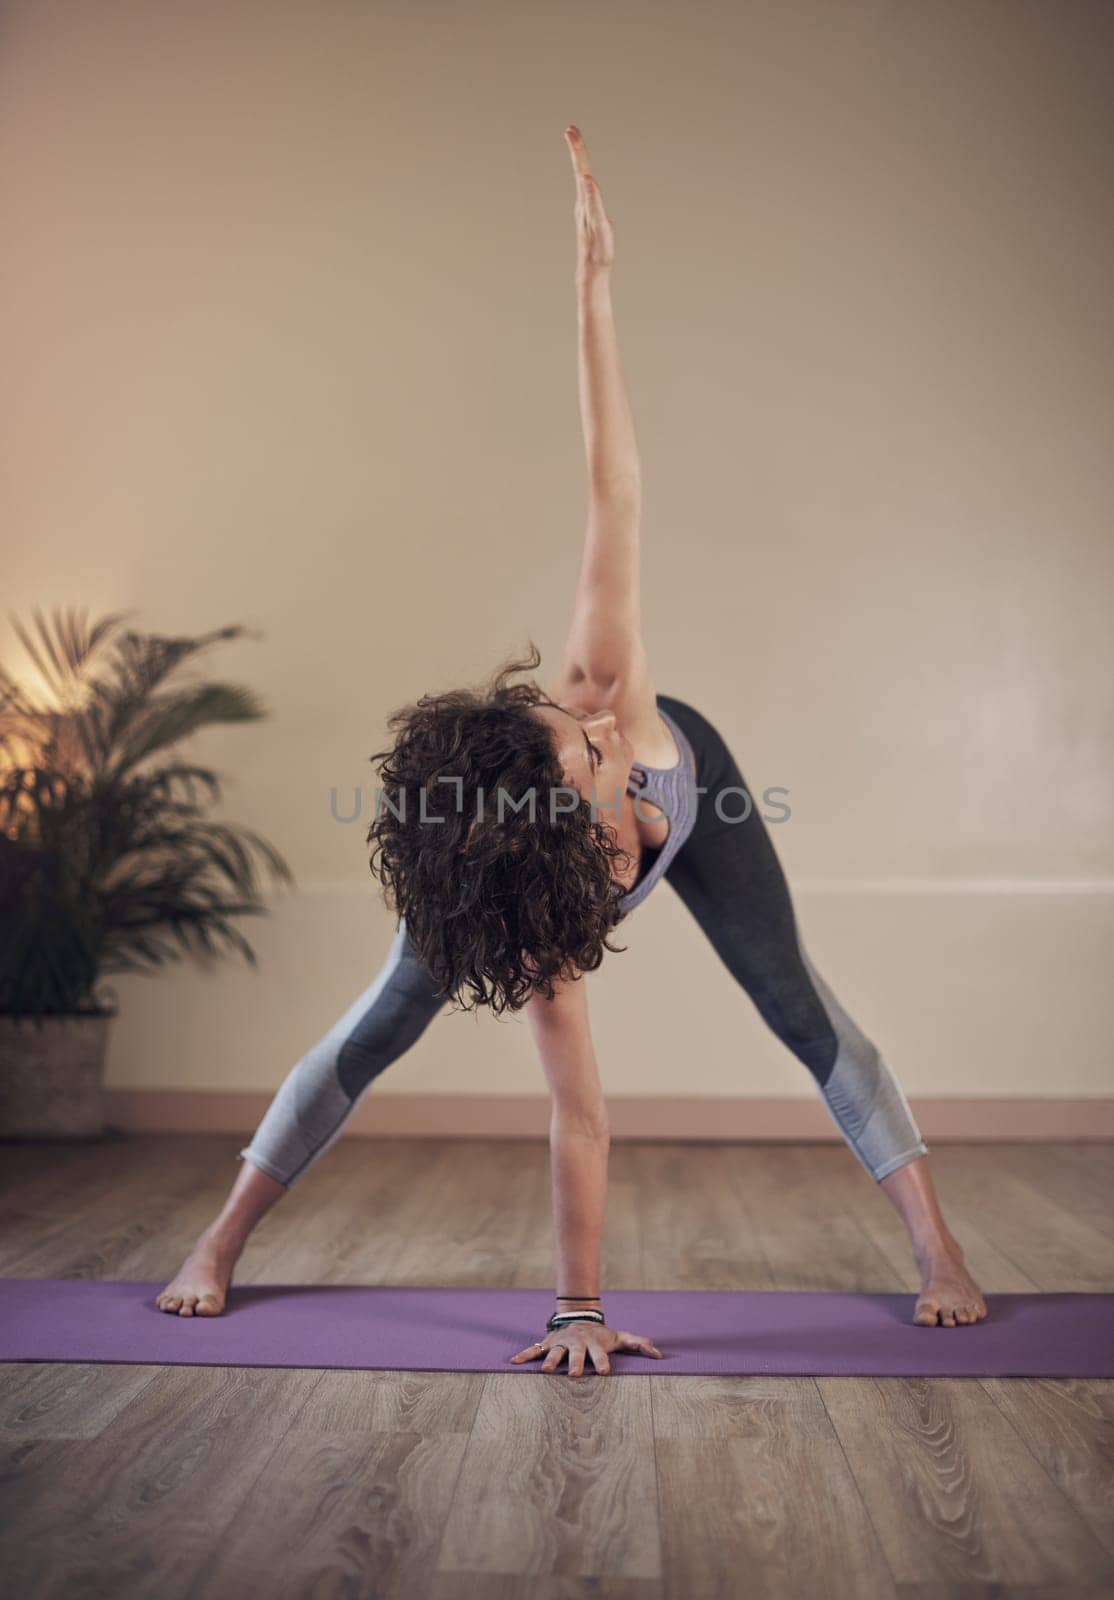 My mat is my canvas and yoga is my art. Full length shot of an attractive young woman standing and holding a yoga pose during an indoor yoga session alone